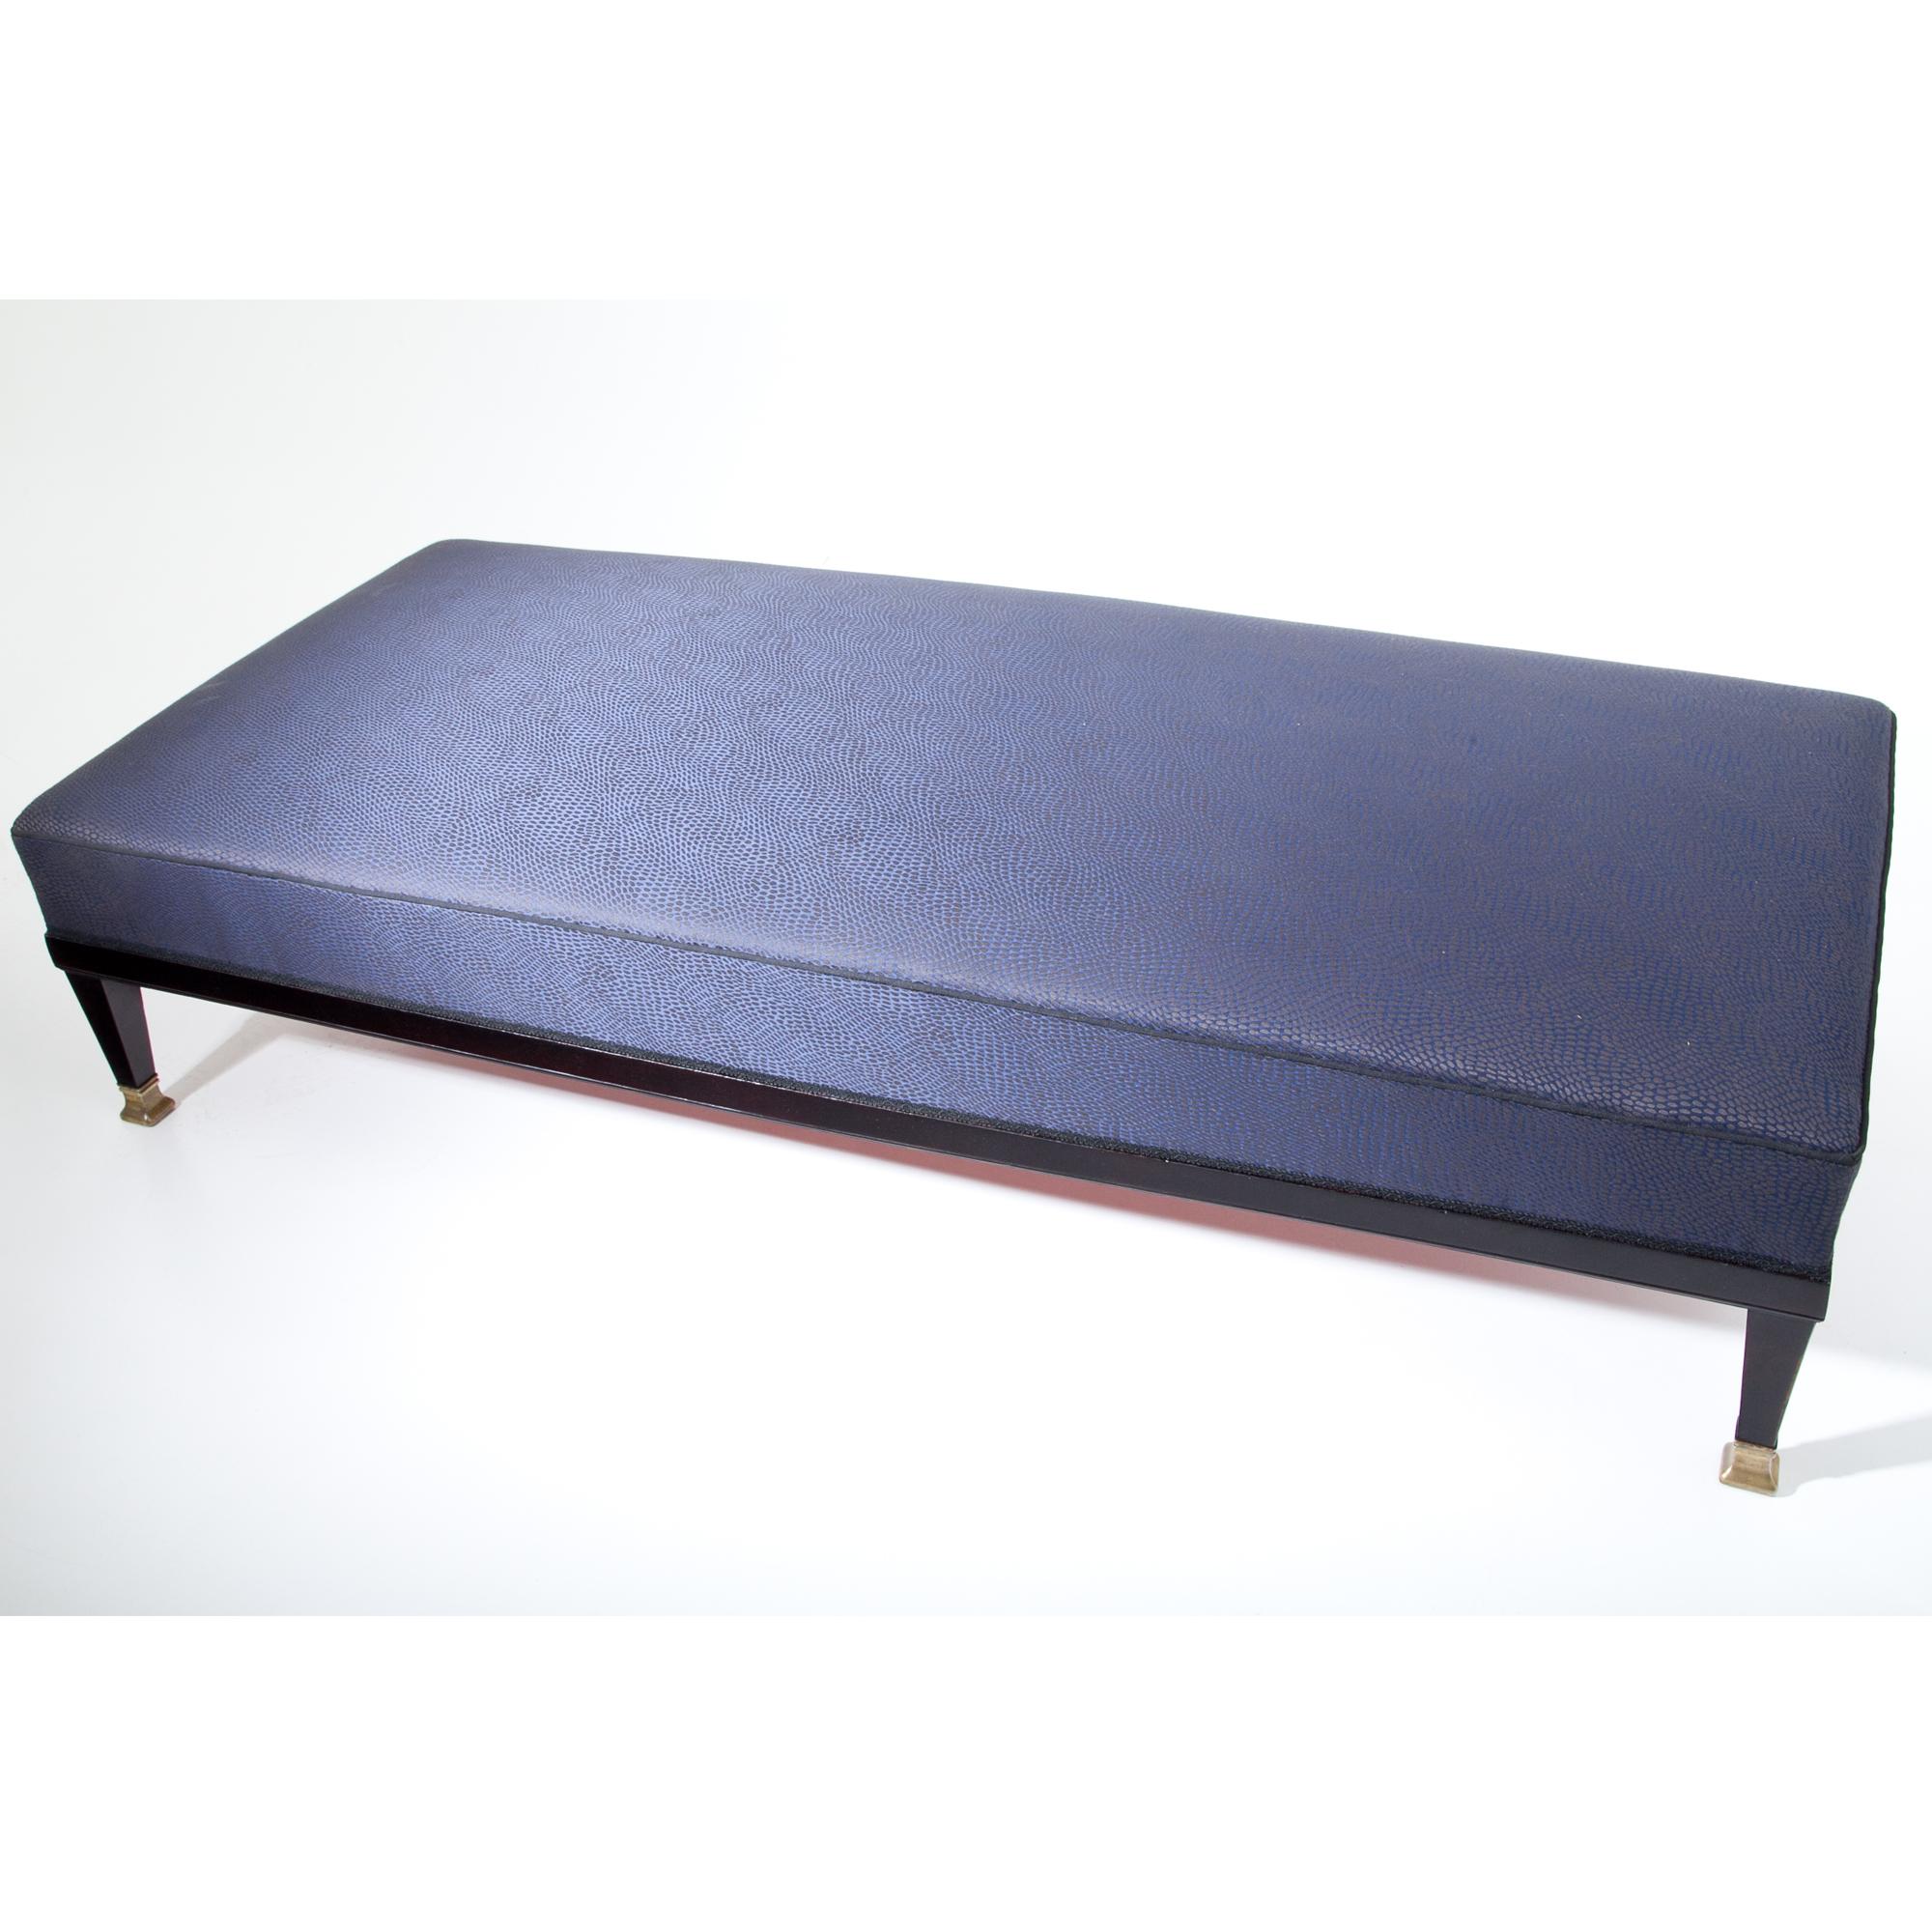 Ebonized Art Nouveau daybed with a straight frame, standing on tapered feet with brass caps. The daybed was hand-polished and reupholstered with a dark-blue patterned fabric.